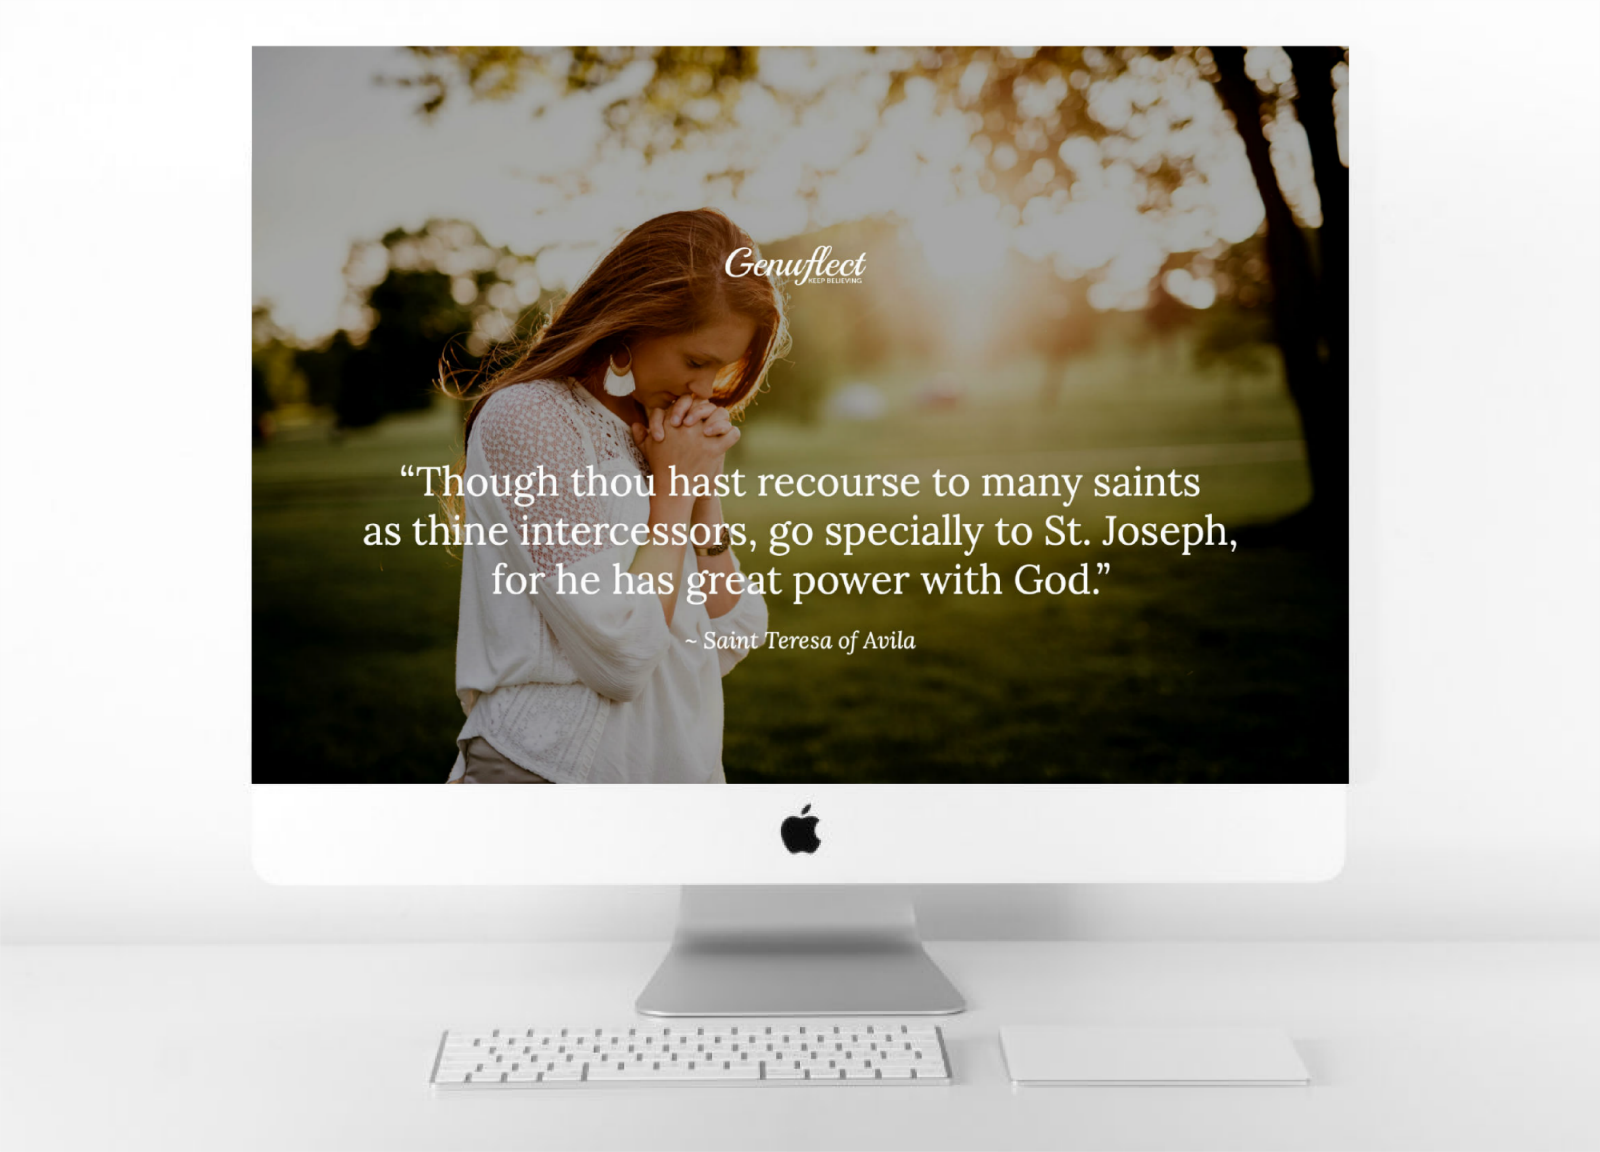 Genuflect - Background Image on Computer of woman with head bent and hands folded in prayer